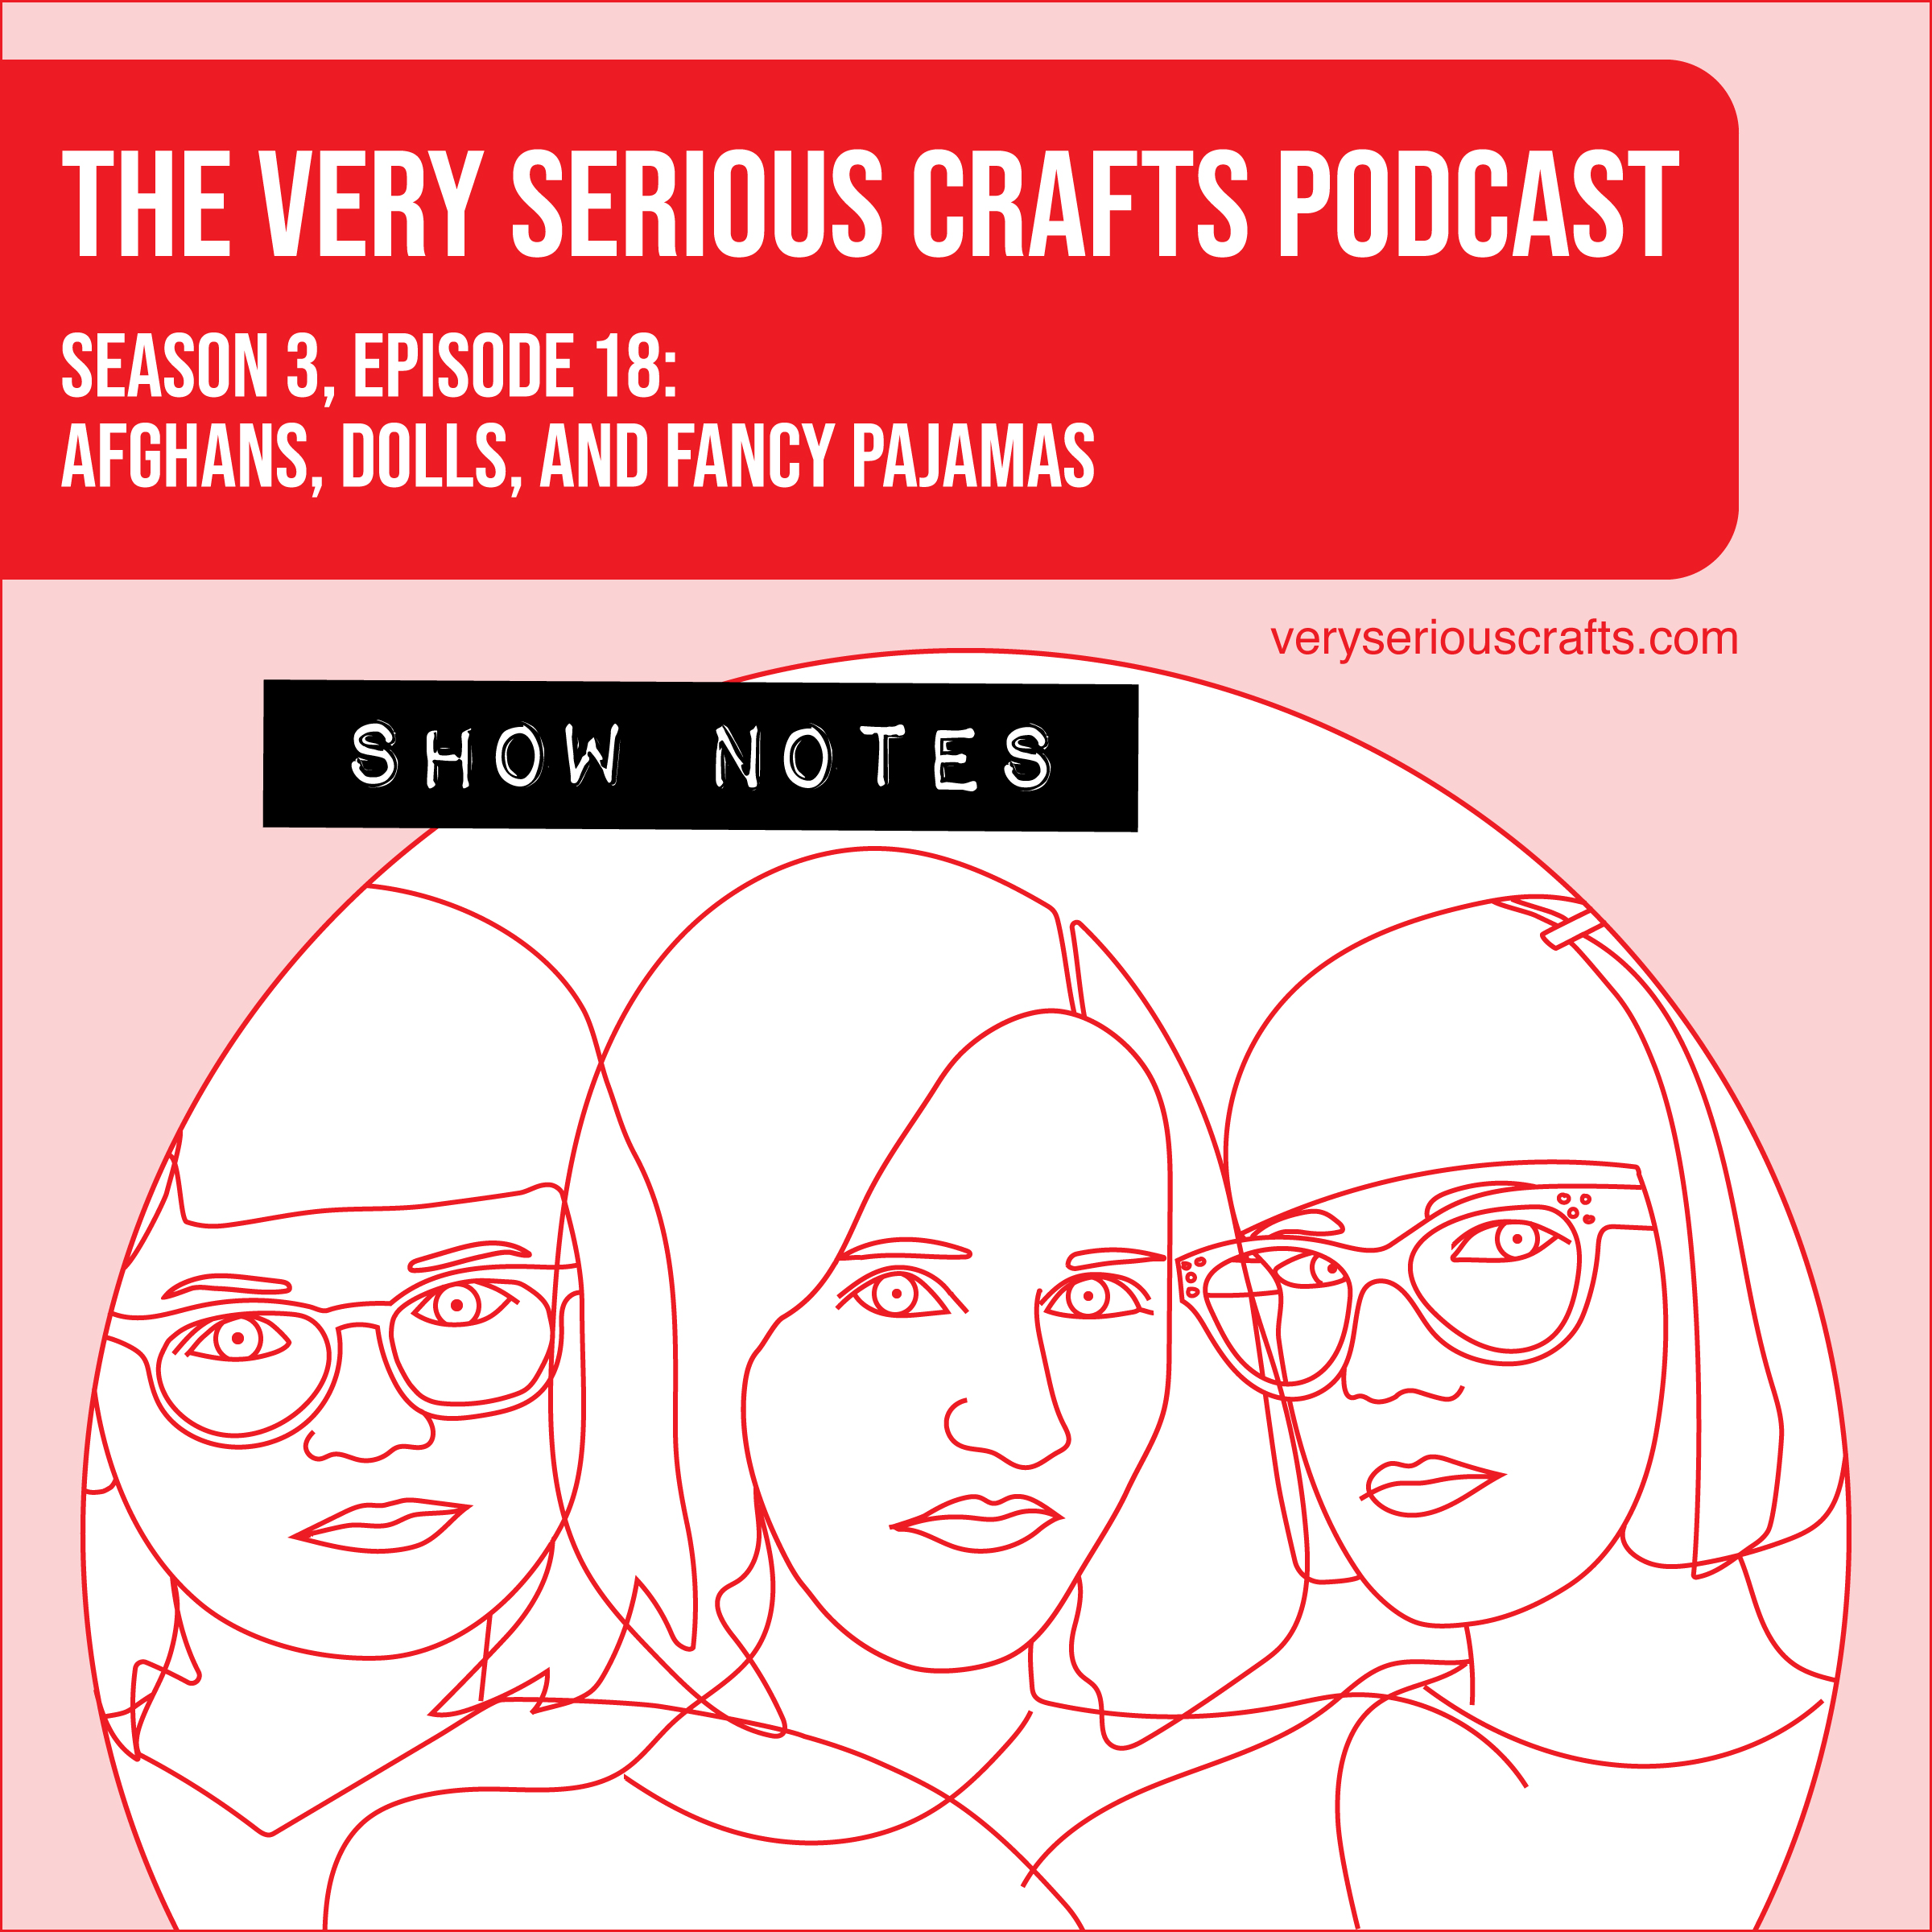 Download The Very Serious Crafts Podcast Season 3 Episode 18 Afghans Dolls And Fancy Pajamas SVG Cut Files